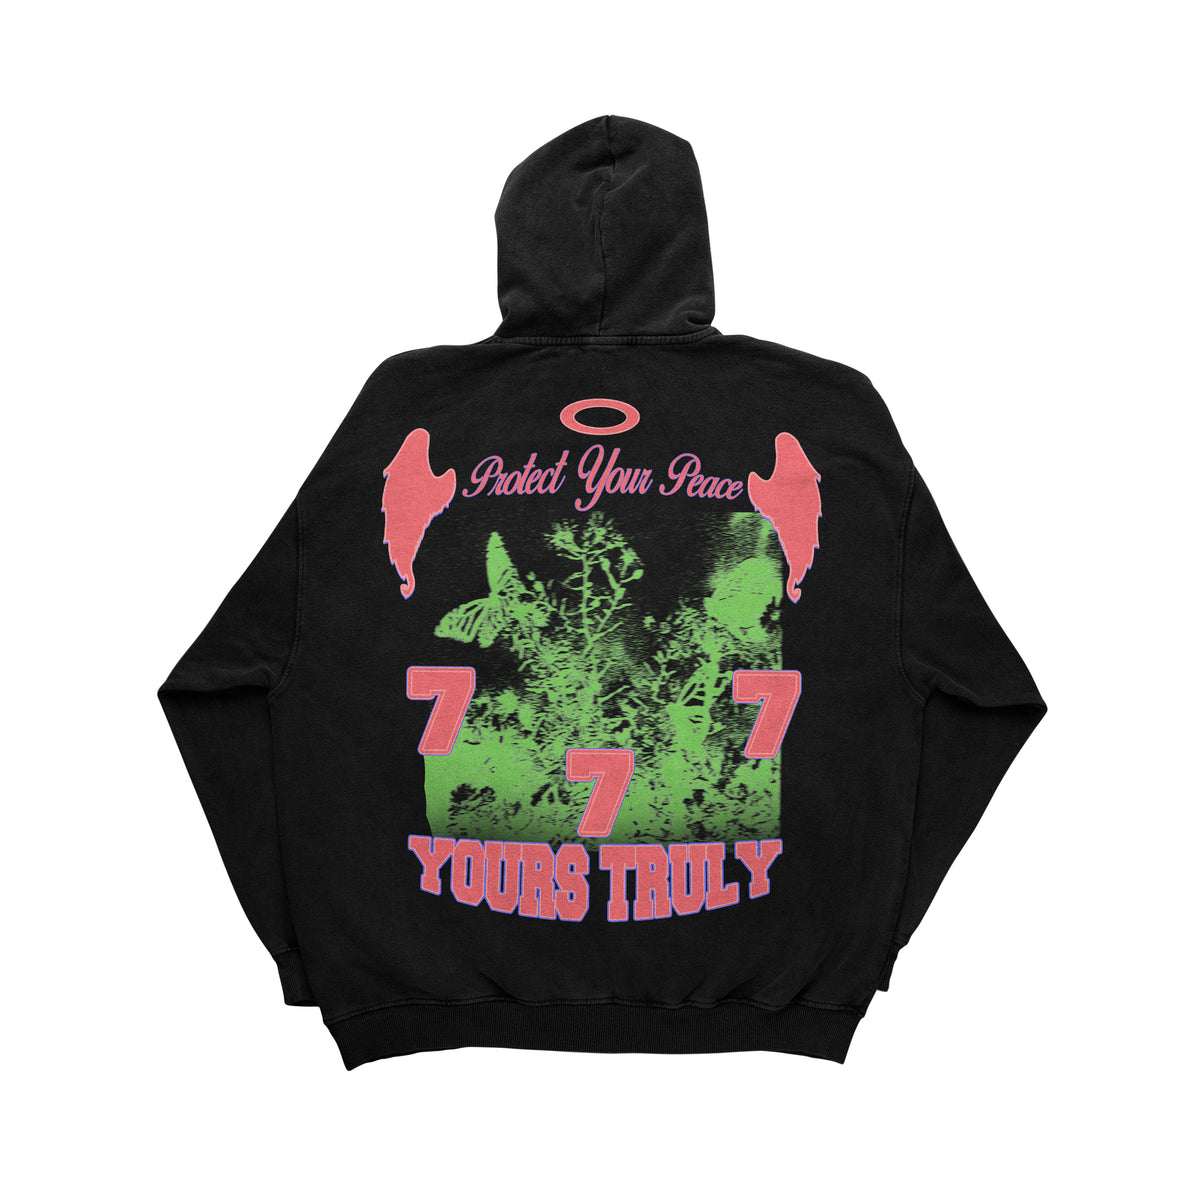 PROTECT YOUR PEACE HOODIE - BLACK